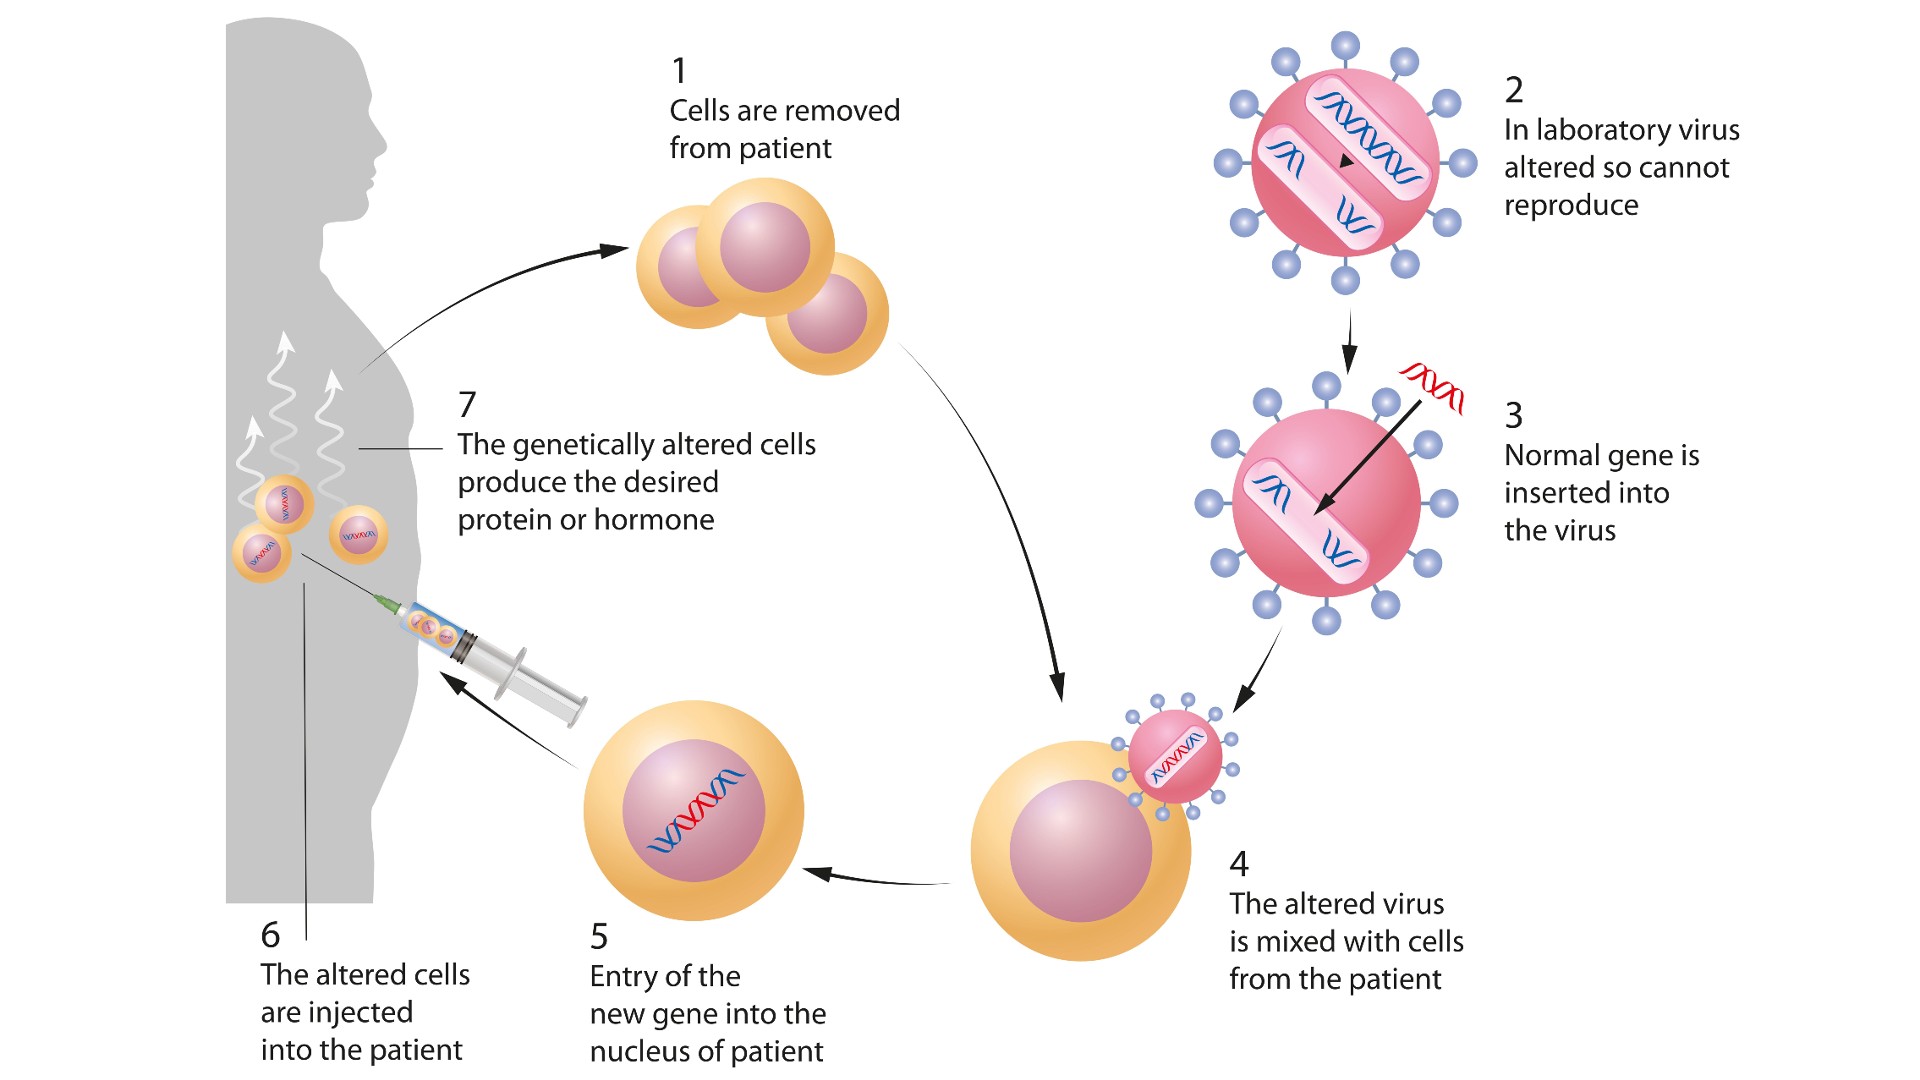 Gene therapy is the insertion of genes into an individual's cells and tissues to treat a disease. This diagram shows an example of ex vivo gene therapy.